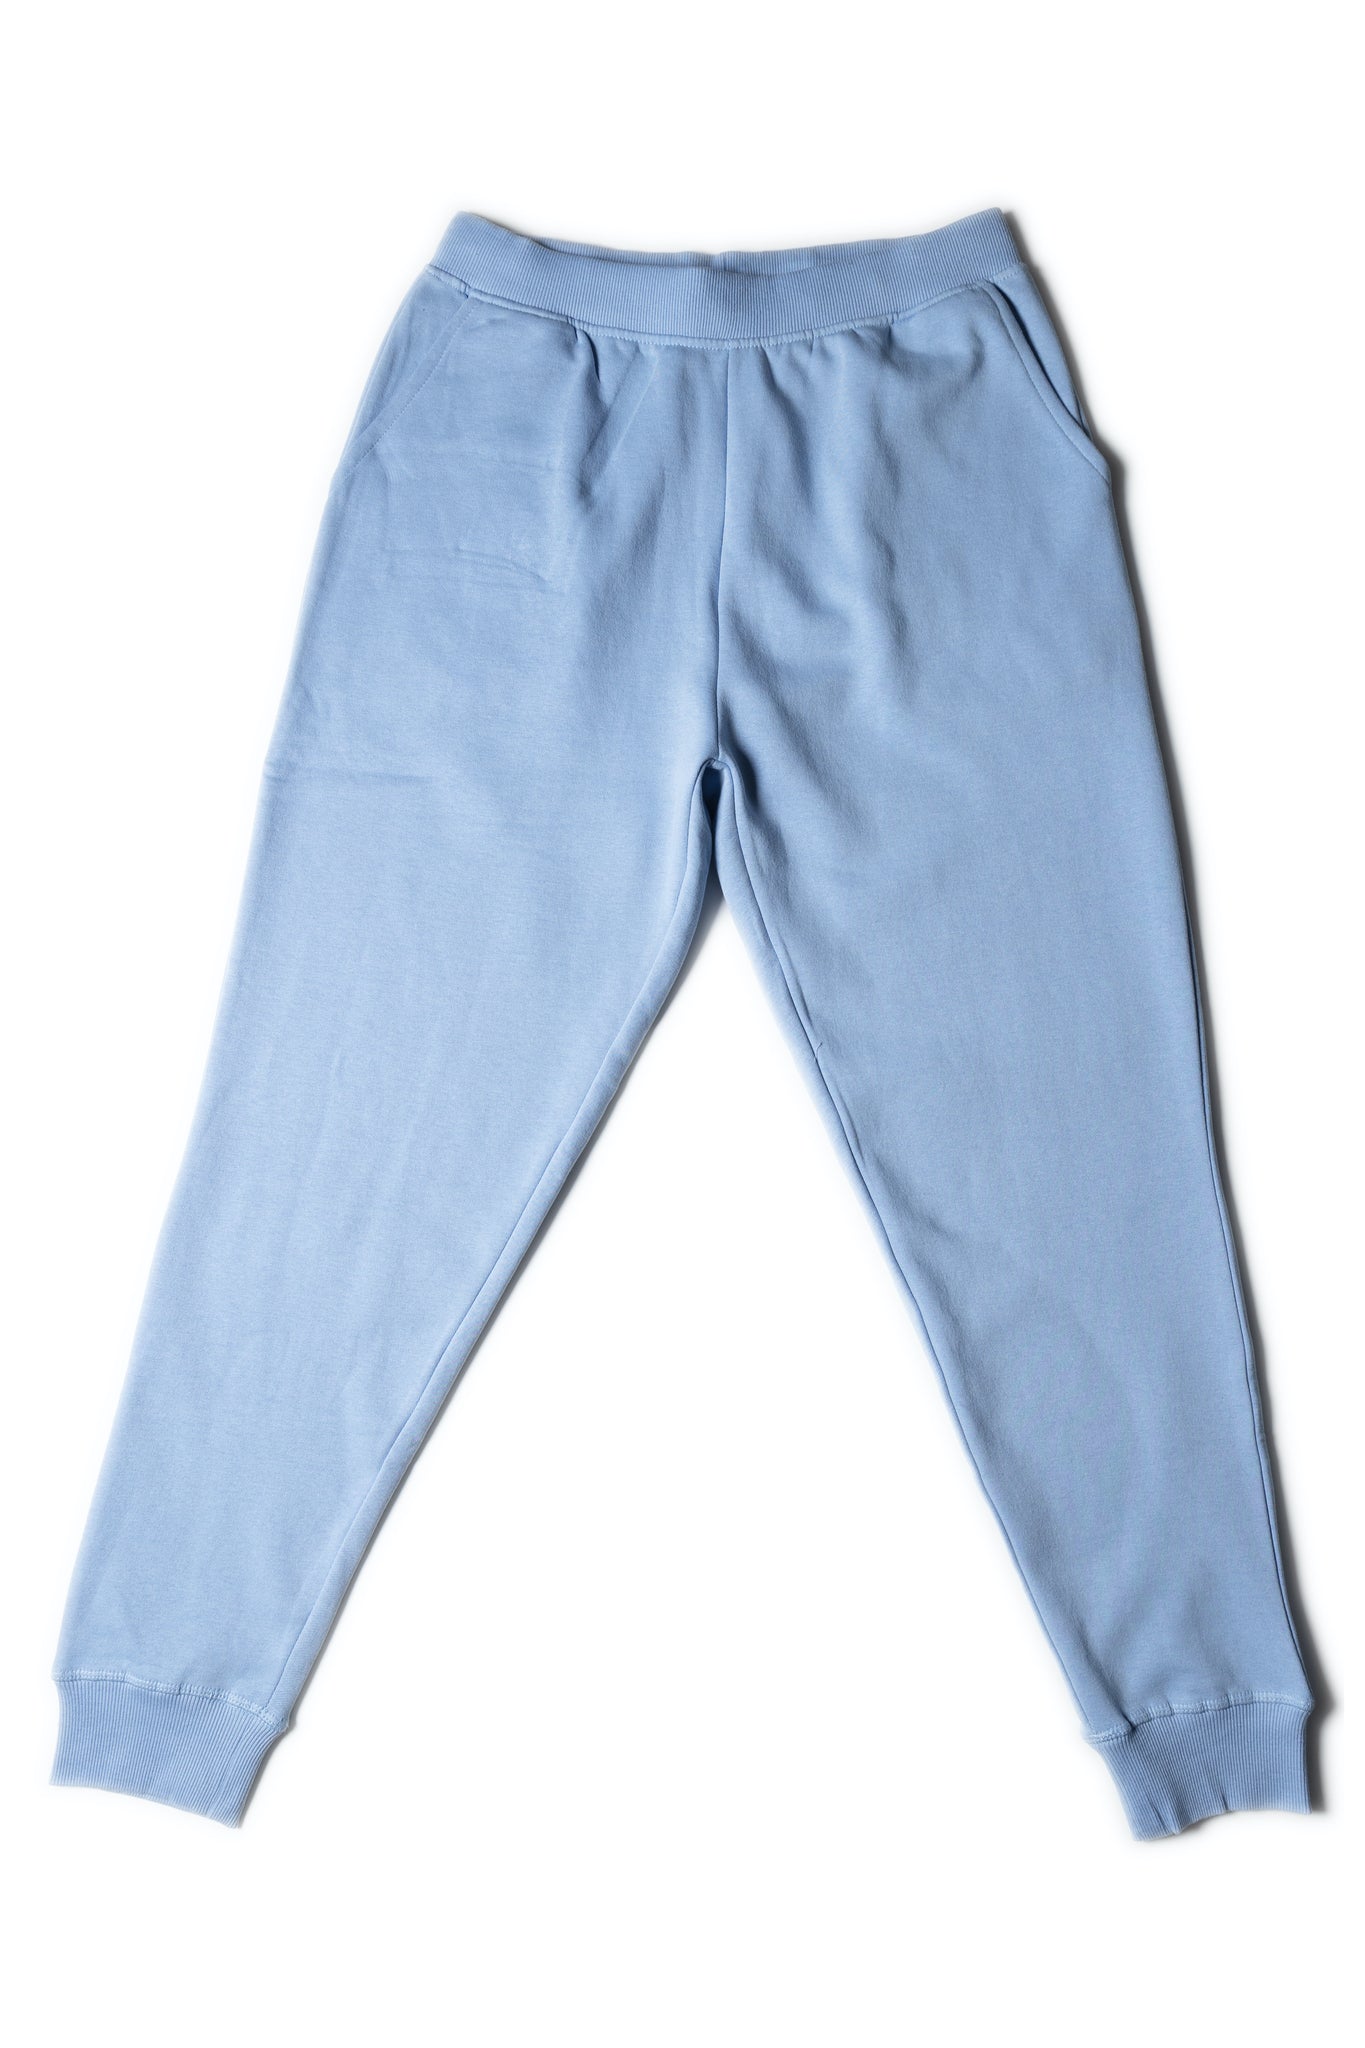 HERO-5020R Unisex Joggers - Sky Blue (Relaxed Fit) – Just Like Hero